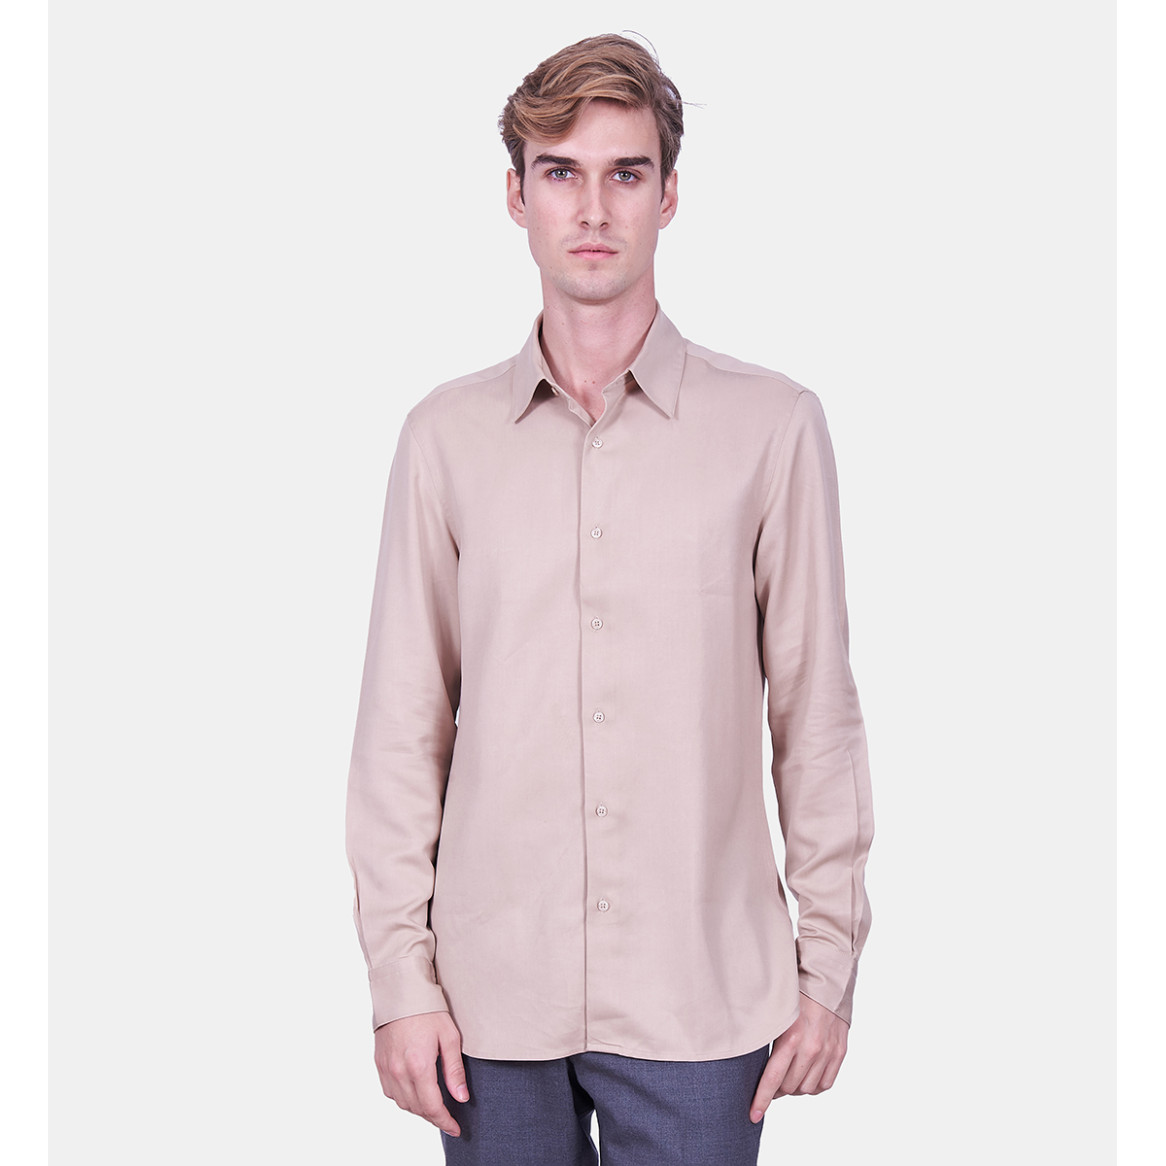 Chemise CÔME coupe droite